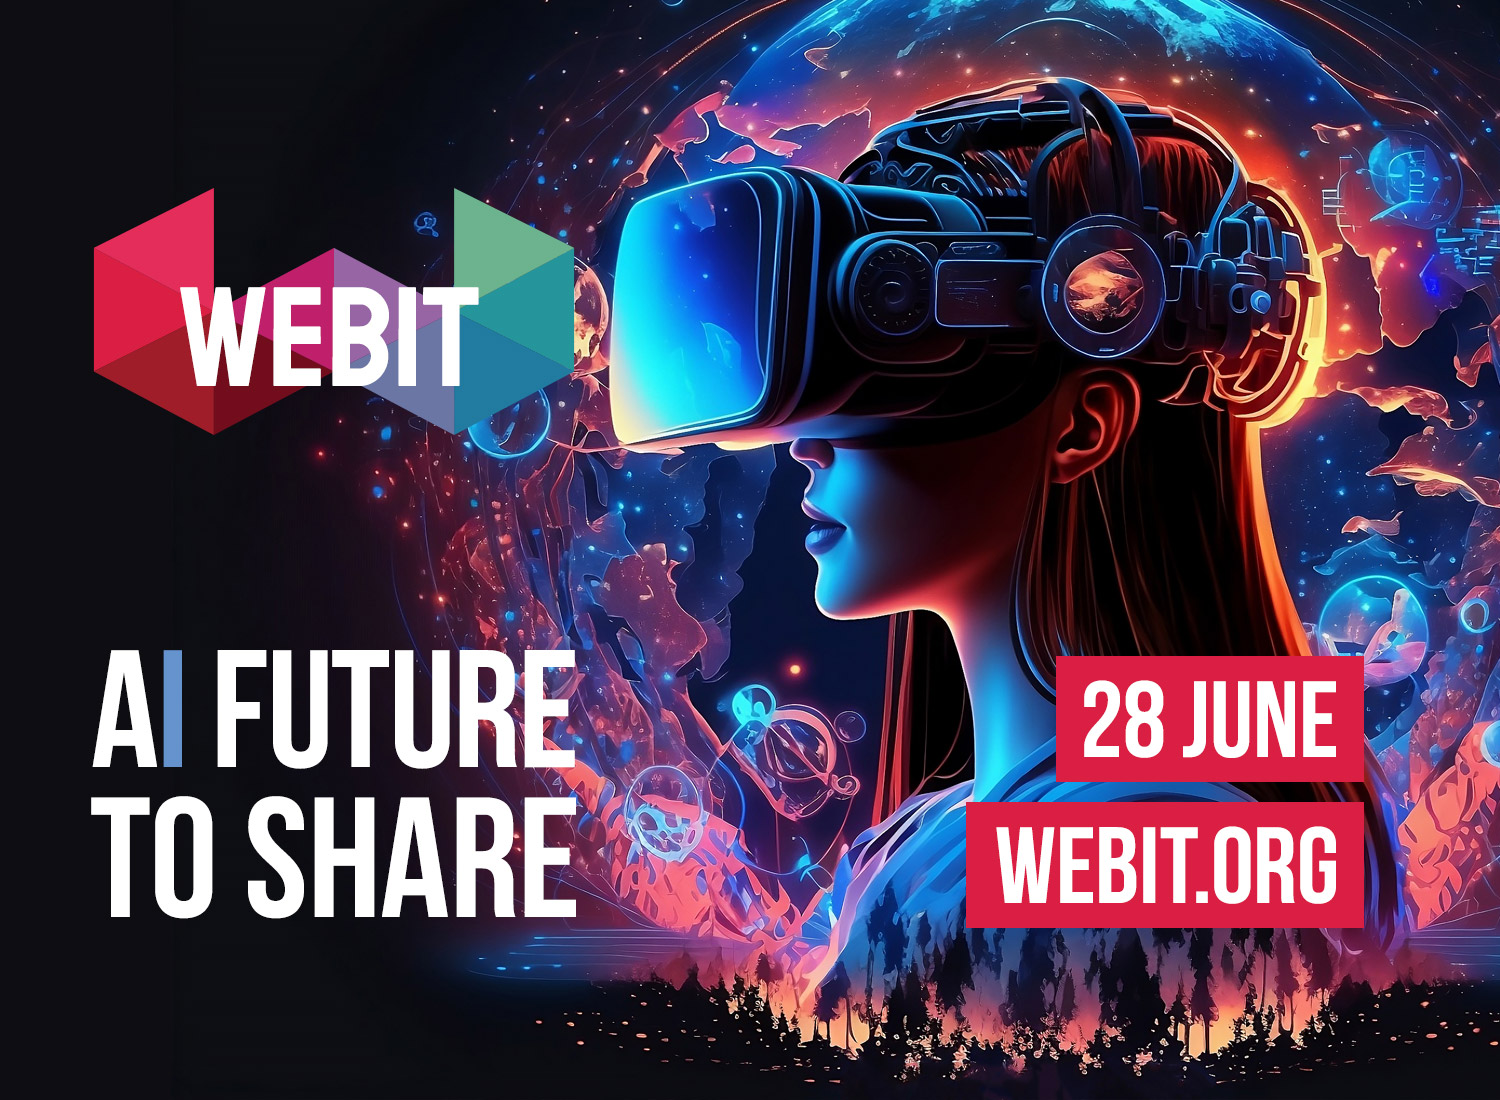 The Metaverse”: Exploring the Next Frontier of Virtual Reality